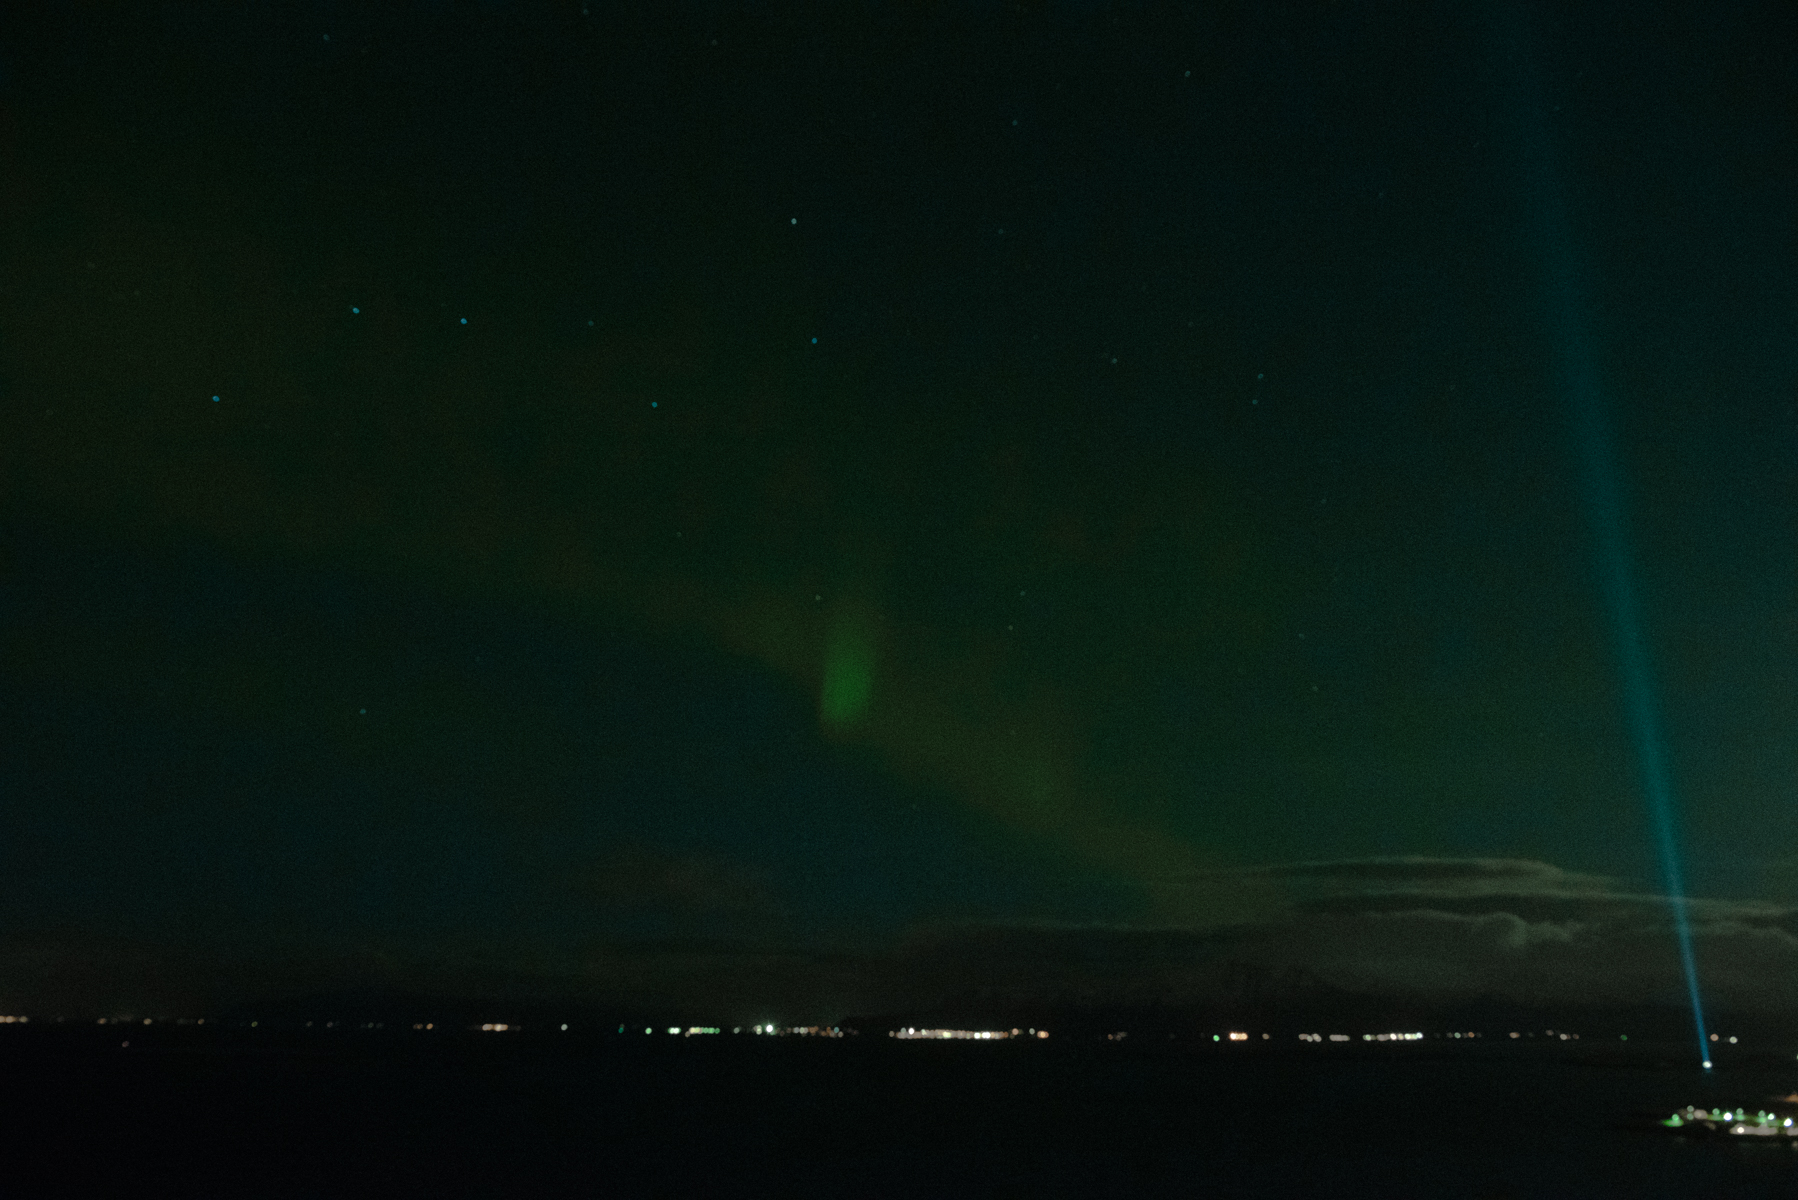 Torrance Coombs and Alyssa Campanella of The A List blog view the Northern Lights at Tower Suites Reykjavik in Iceland